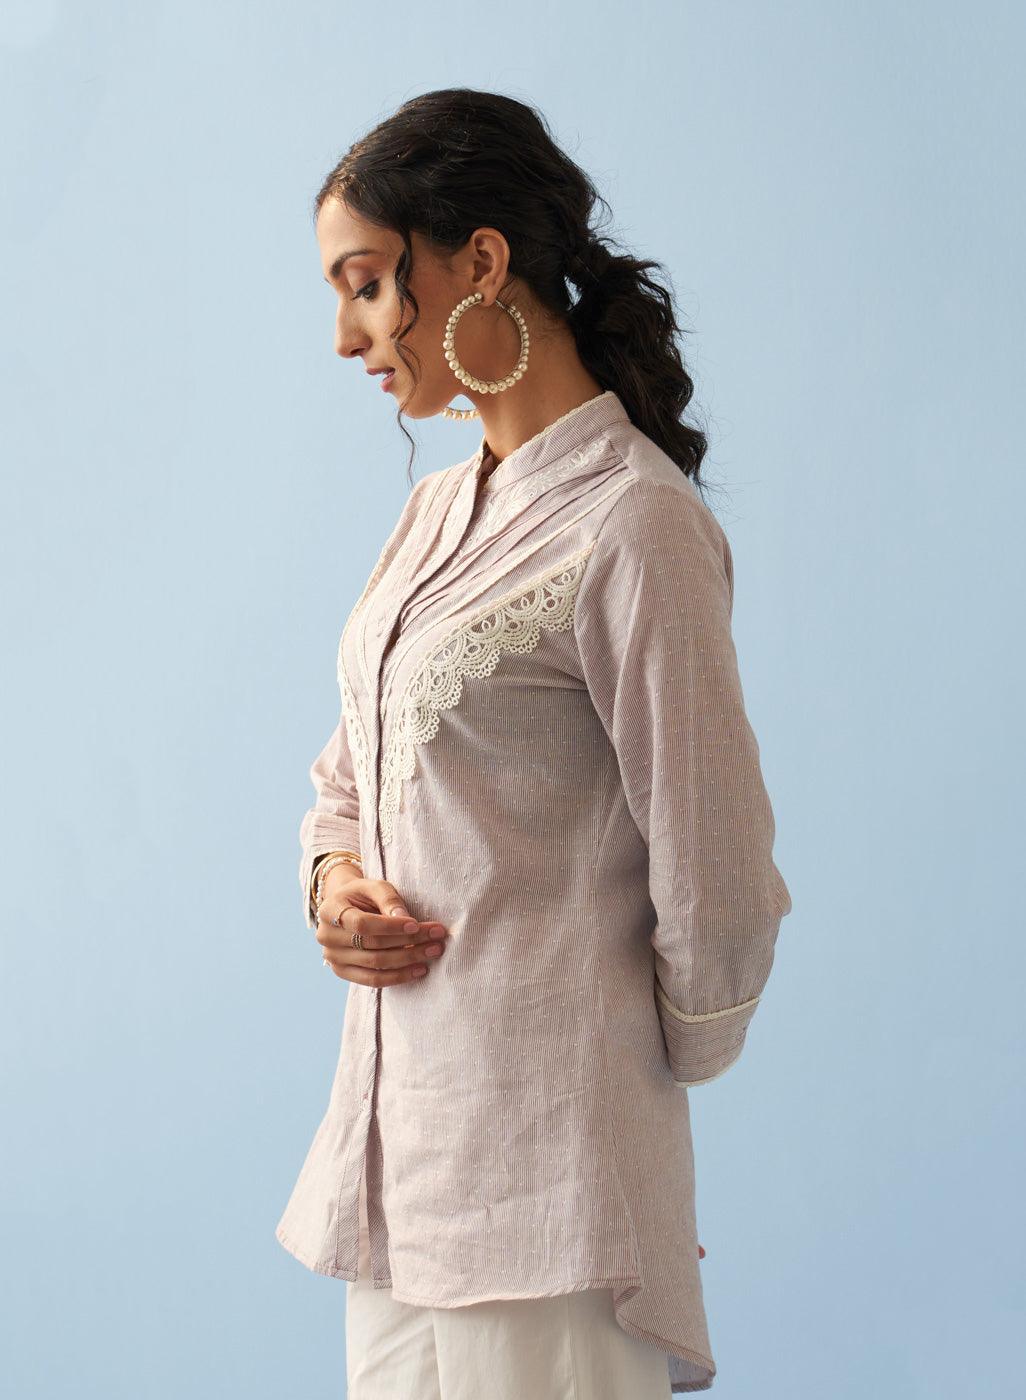 Lavender Embroidered Shirt with Lace Detailing - Lakshita